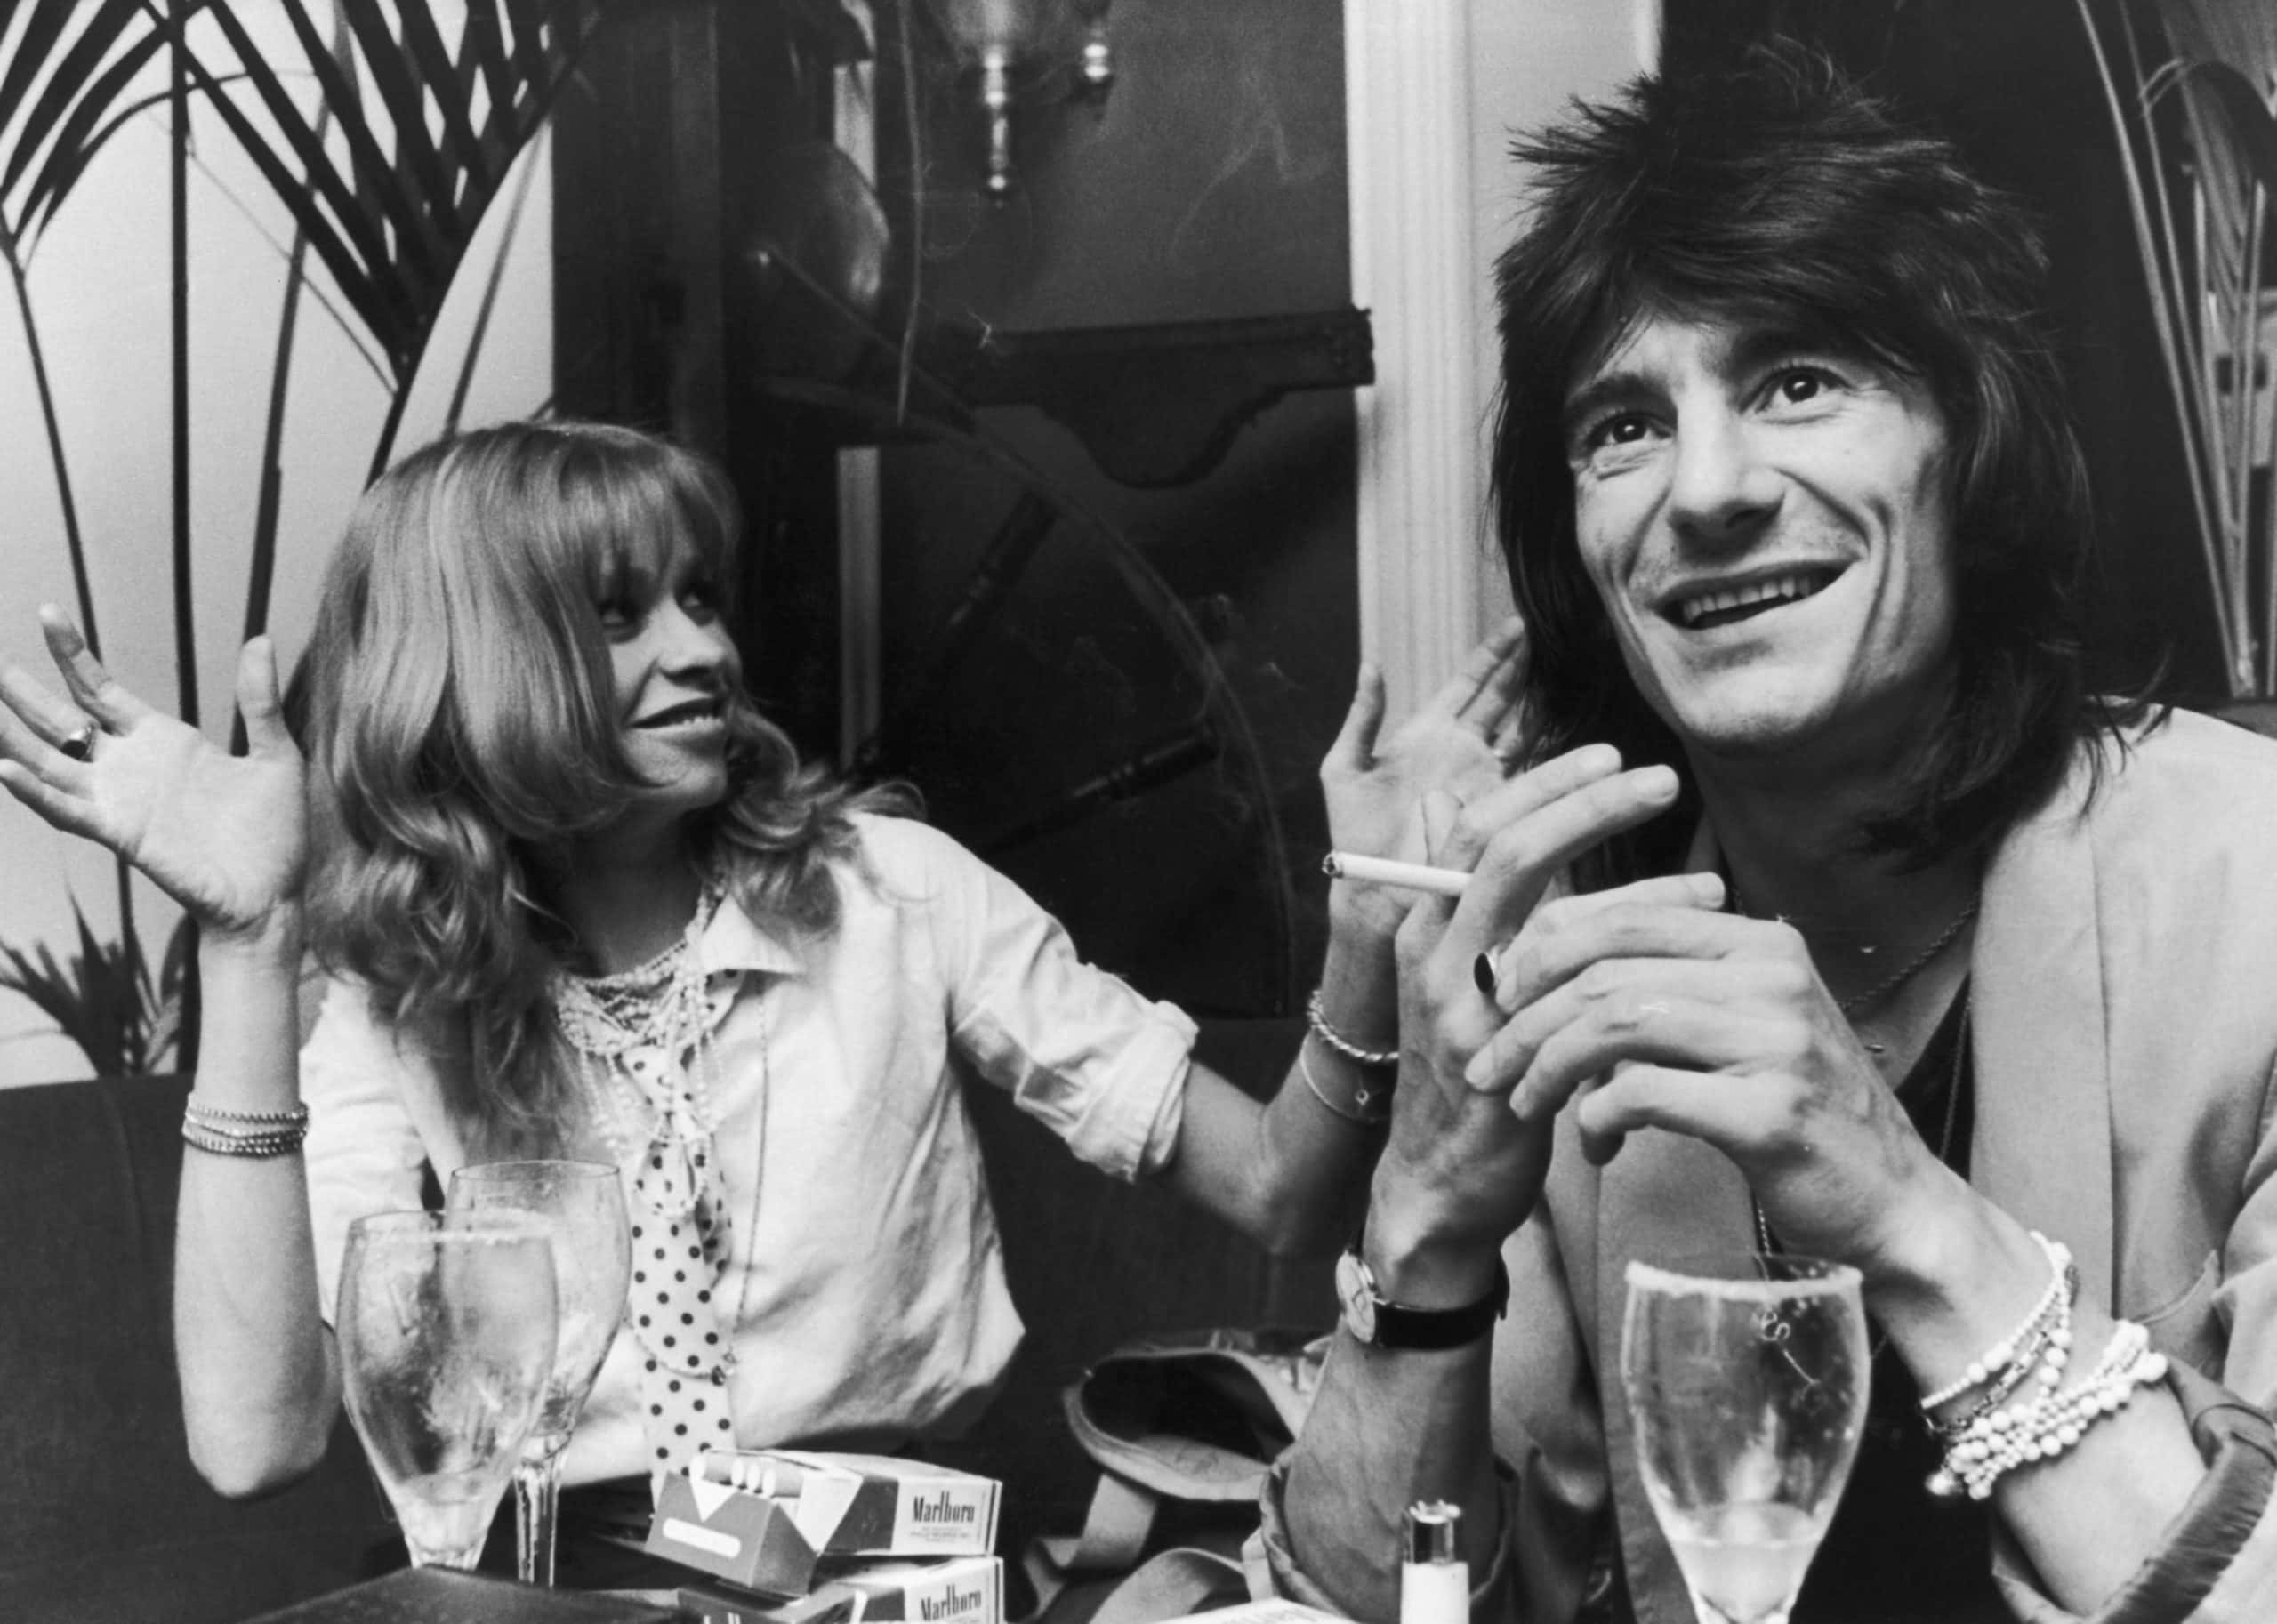 Ronnie Wood Facts